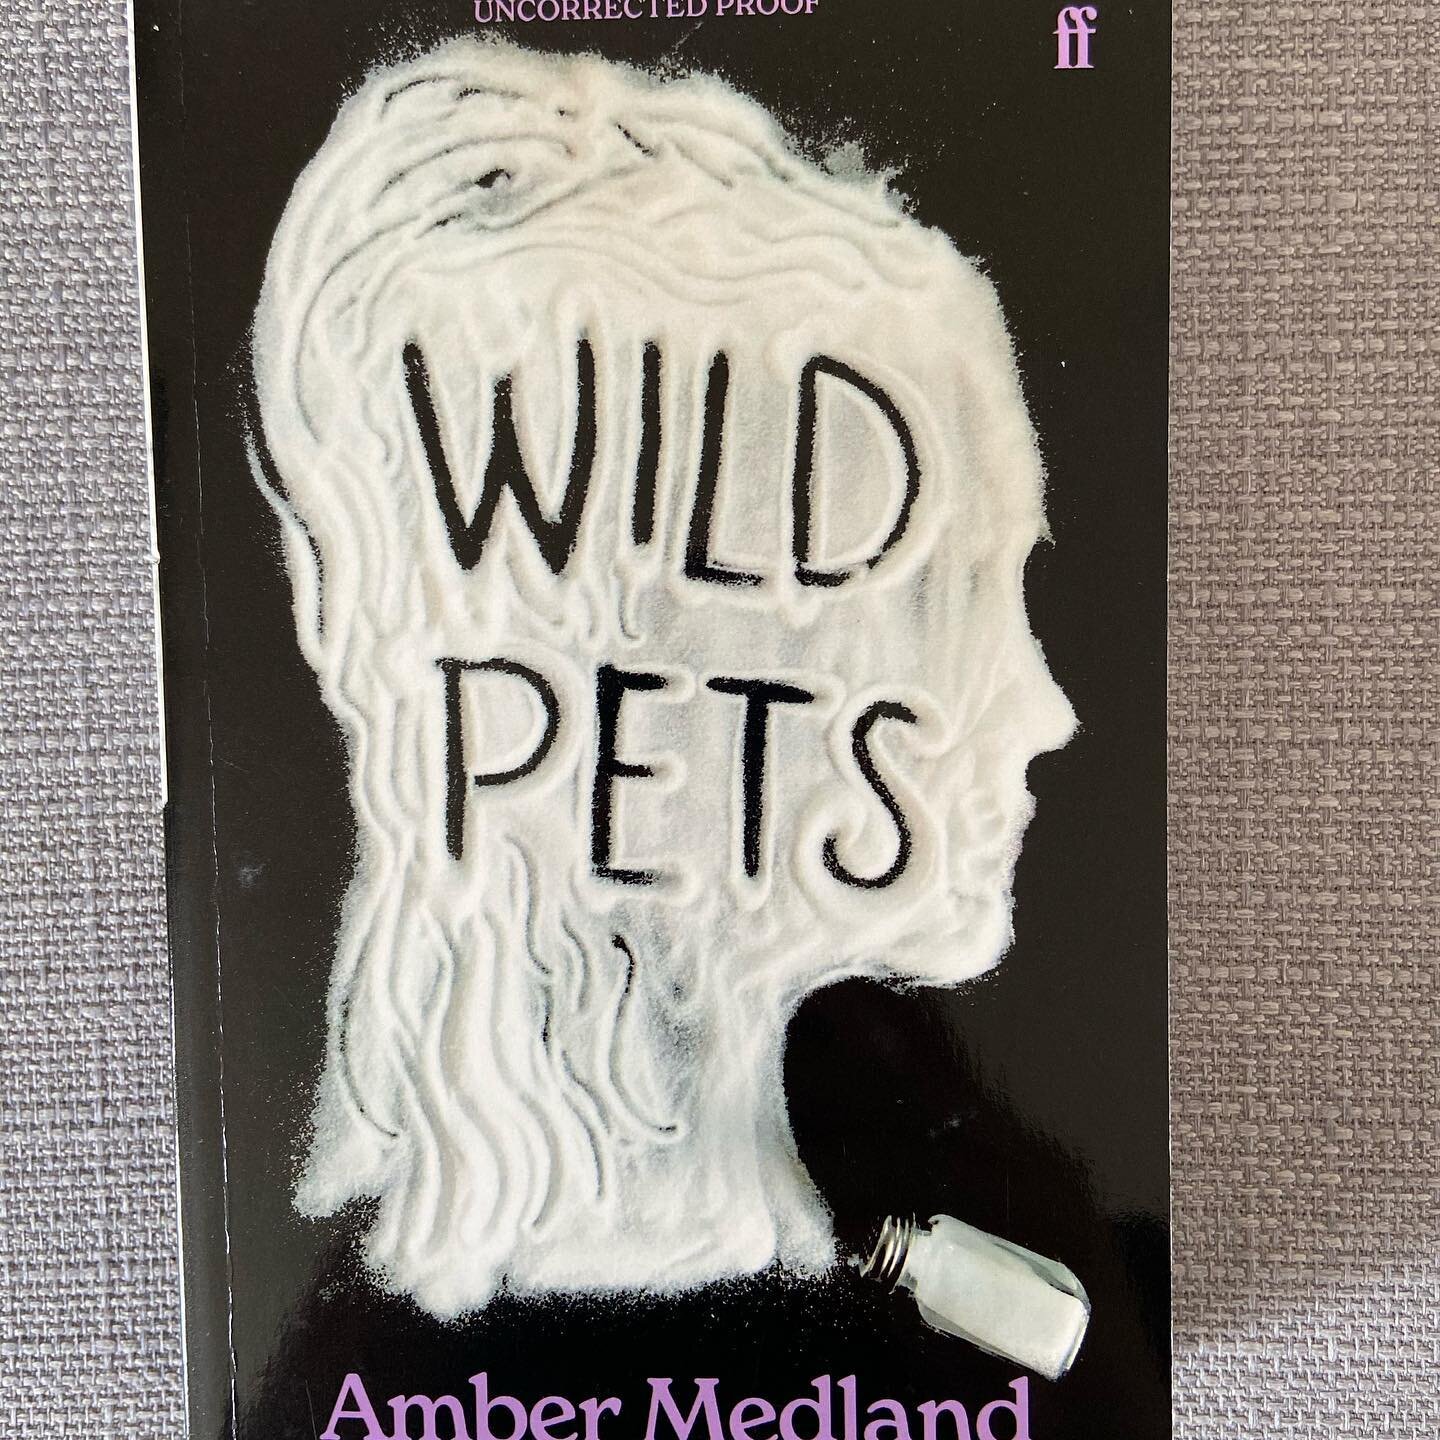 #WildPets looks right up my street. First love, mental health, creative ambition - I can&rsquo;t wait. Thank you, marielouisespp and @faberbooks.